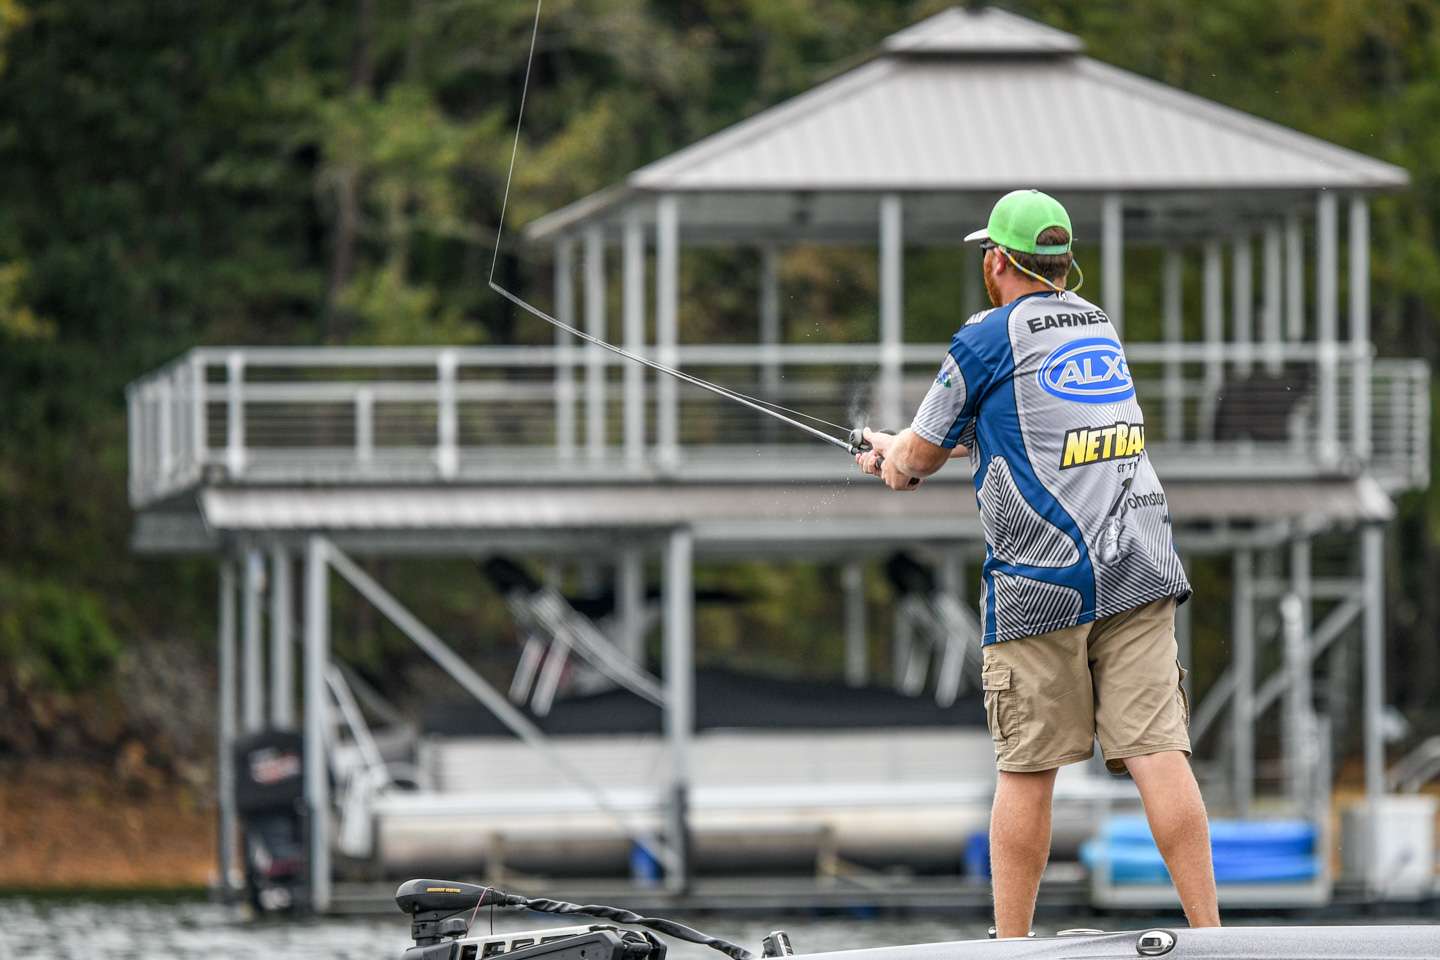 Day 1 action at the 2021 Basspro.com Bassmaster Open at Lewis Smith Lake is heating up here in the afternoon!